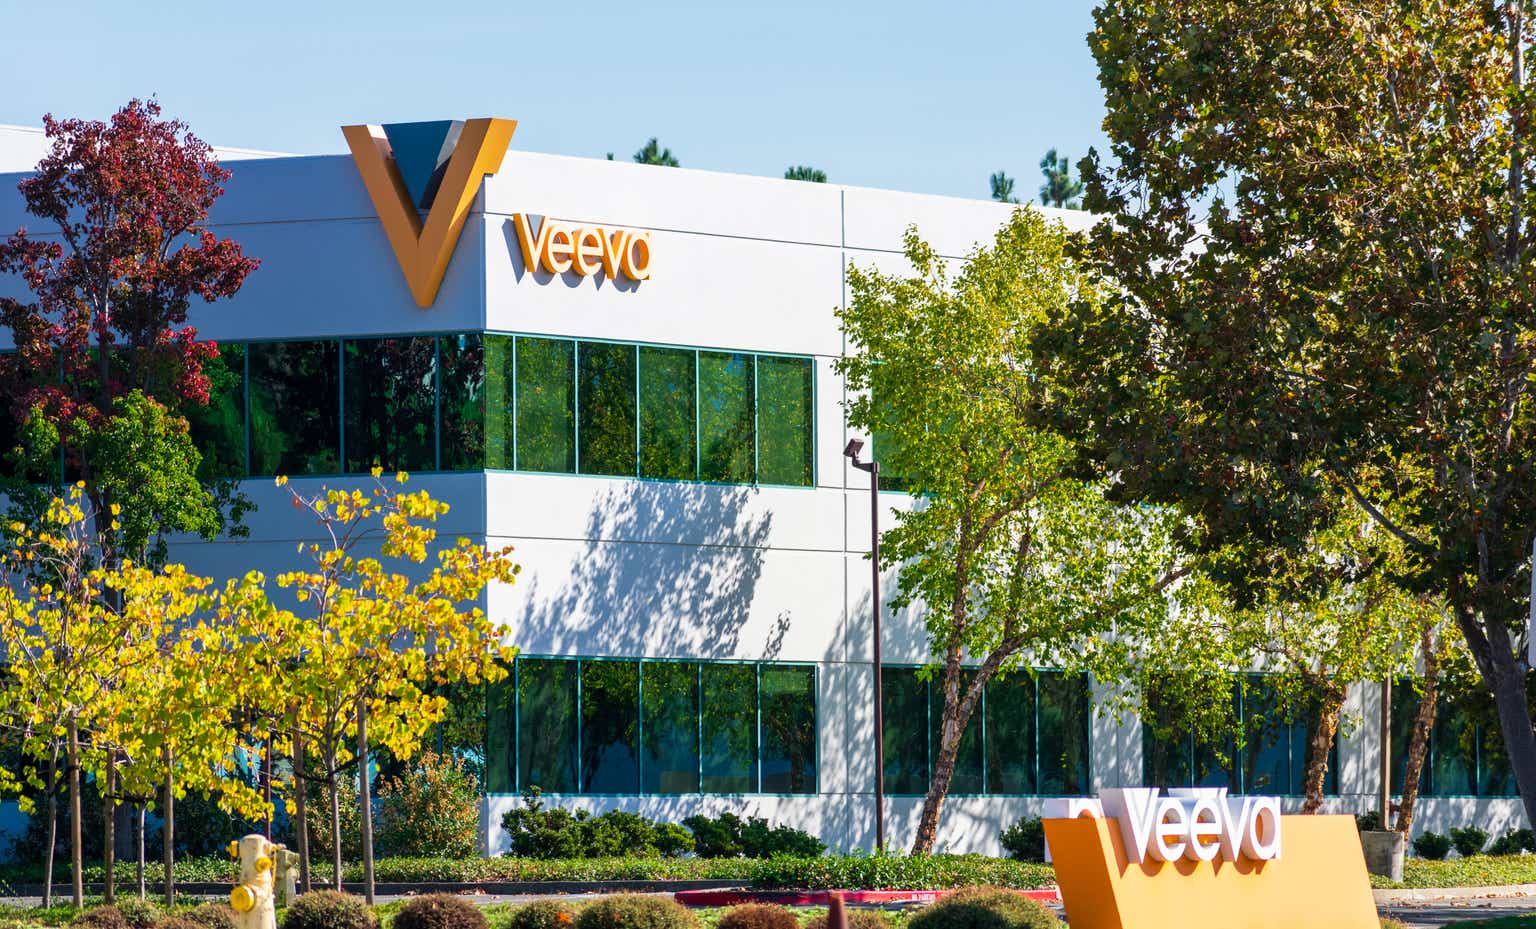 Veeva Systems: Strengths Shine Through With Q1 Results